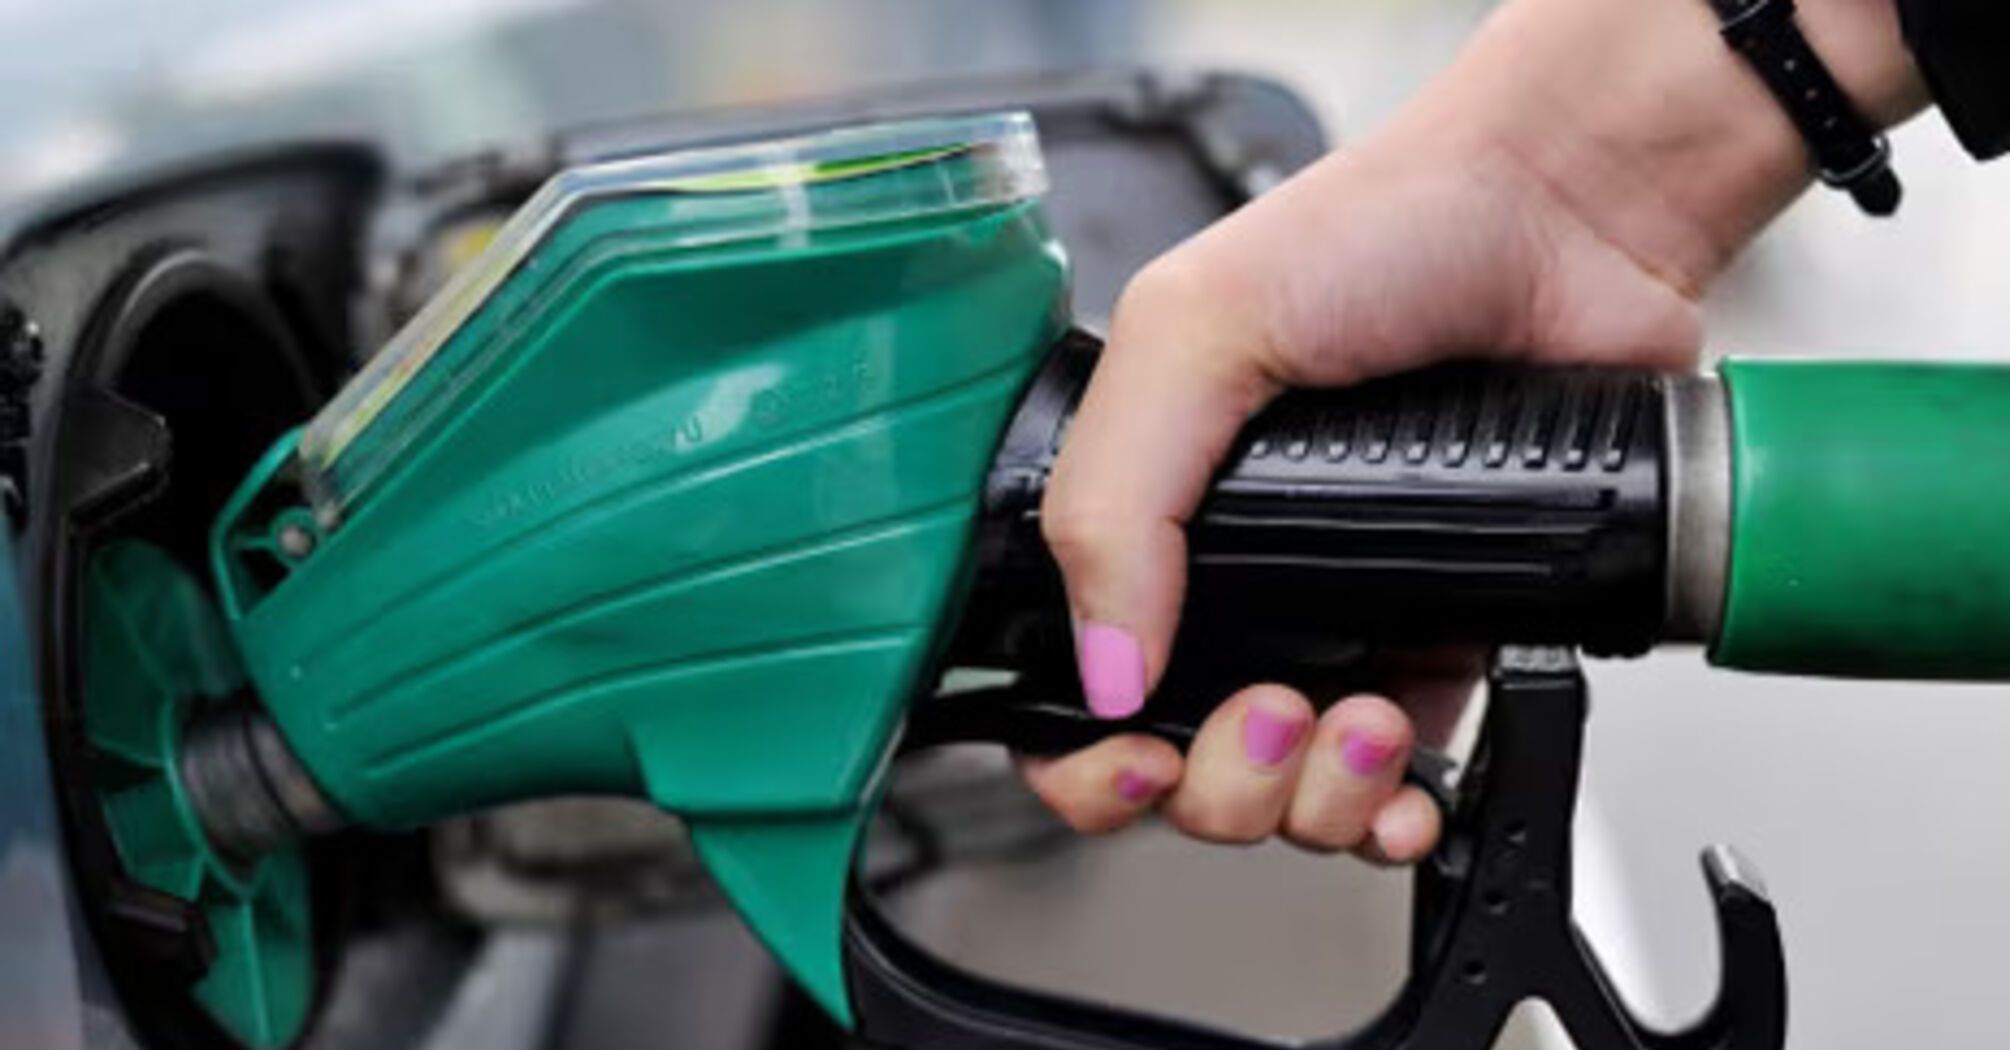 Top 5 countries with the most expensive fuel prices